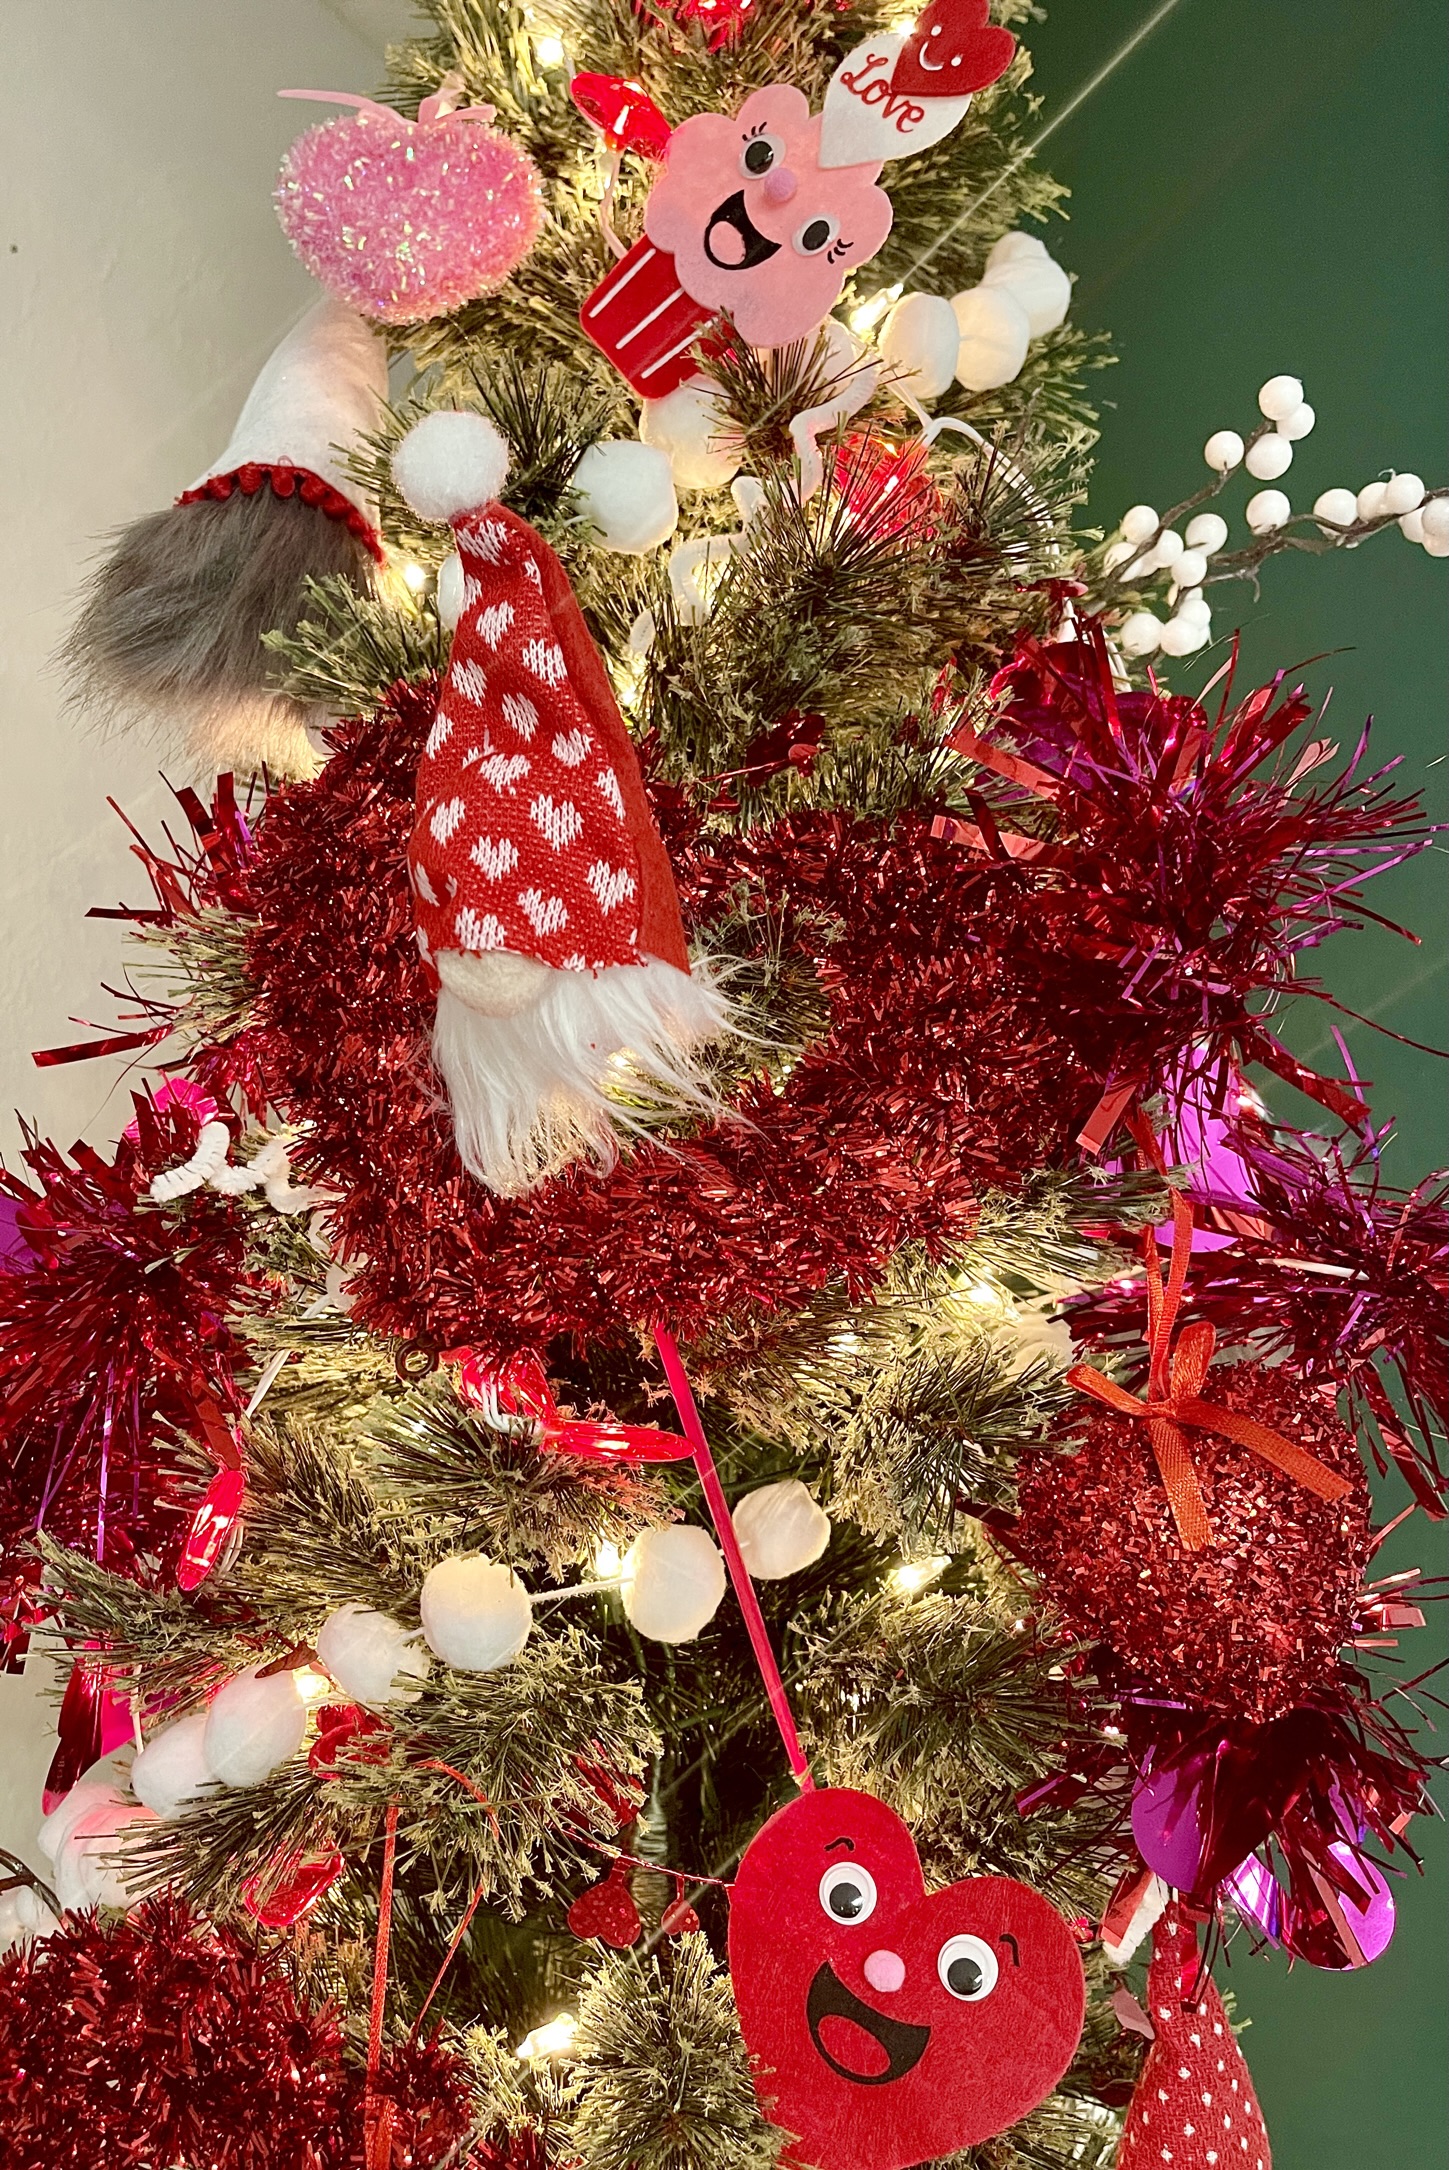 Turn Your Christmas Tree into a Valentine's Day Tree